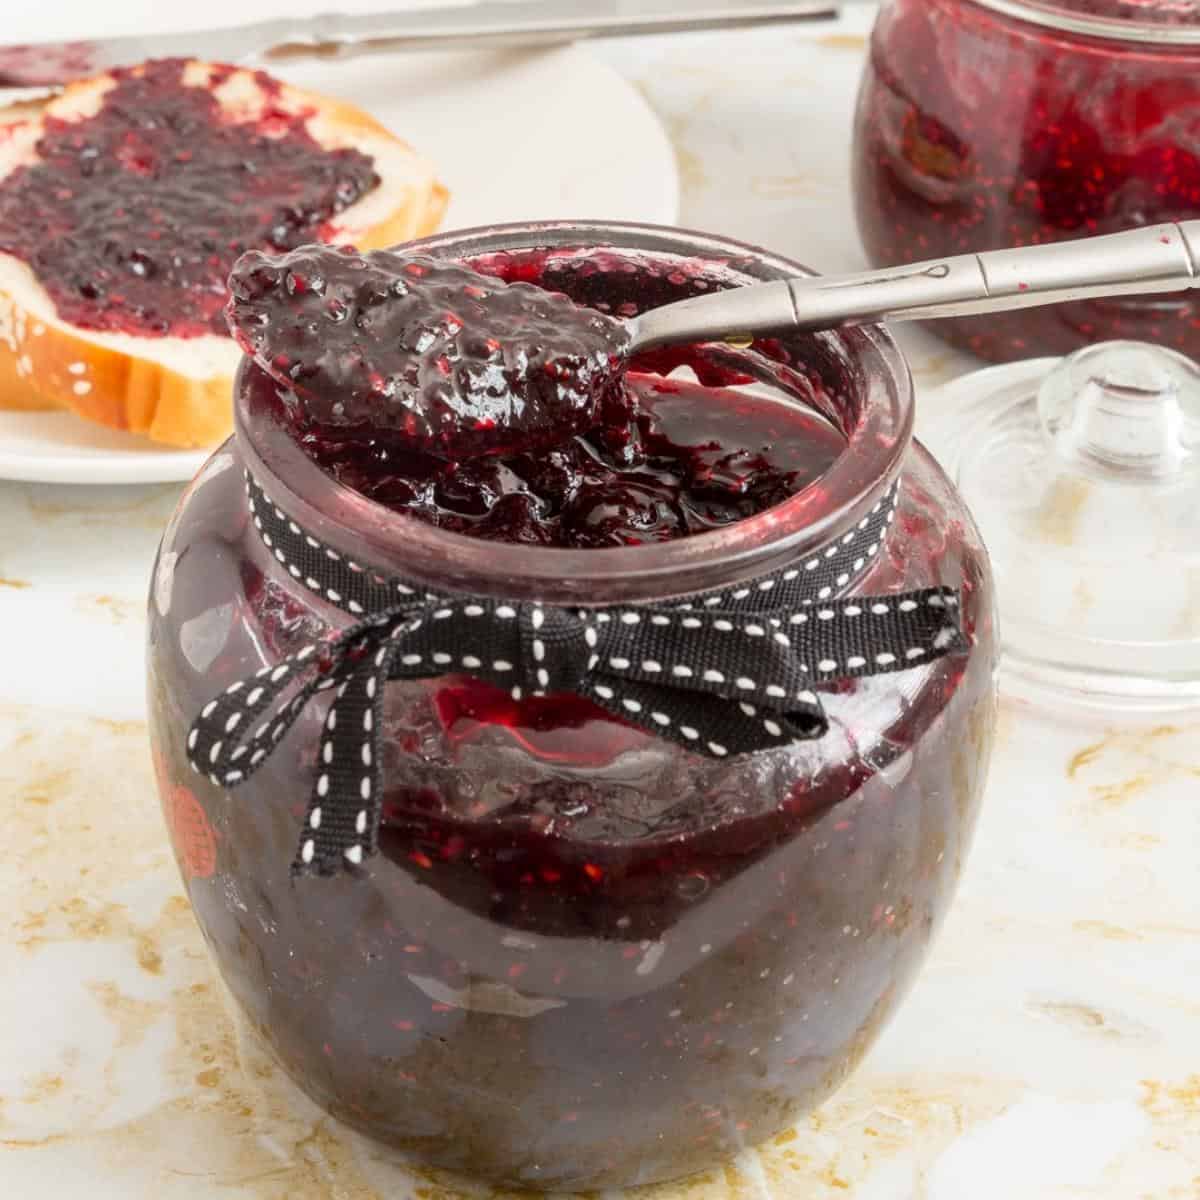 A jar and spoon with berry jam.